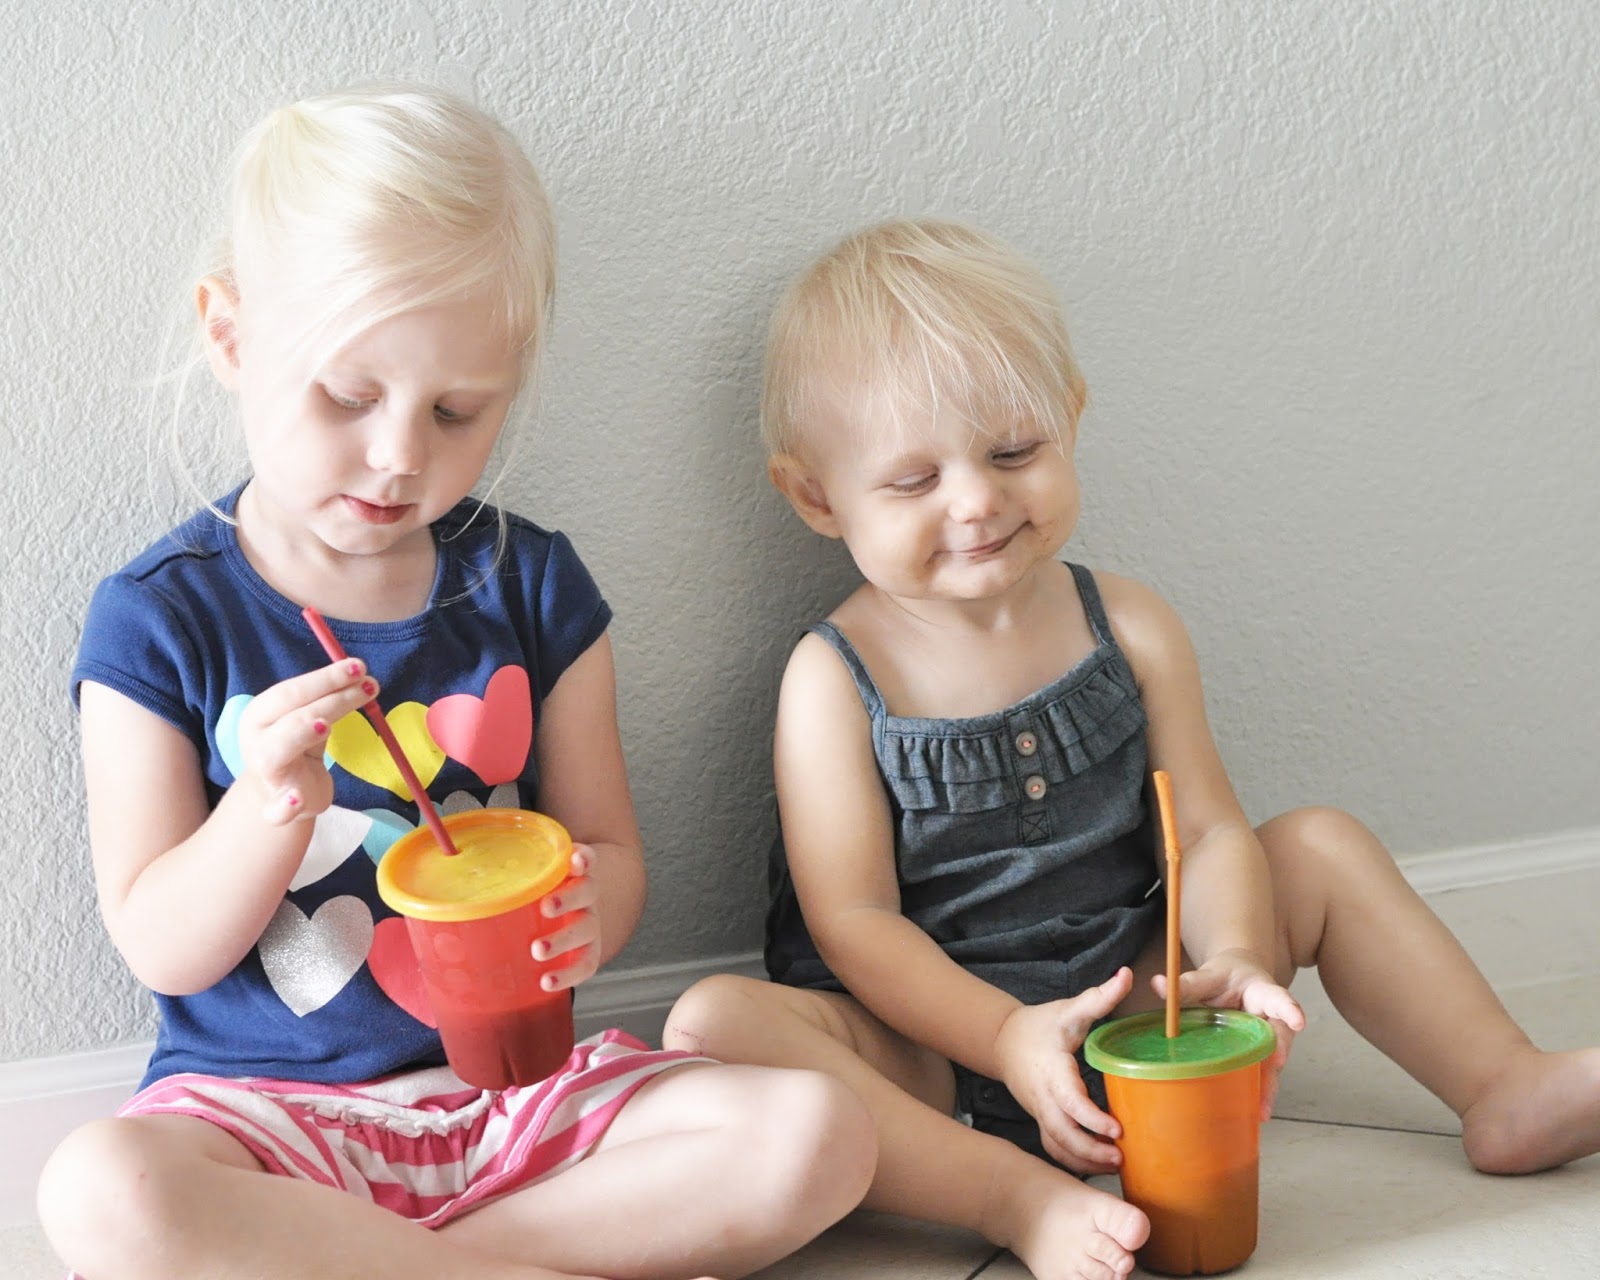 Healthy Foods Toddlers Love: Chocolate Banana Smoothie